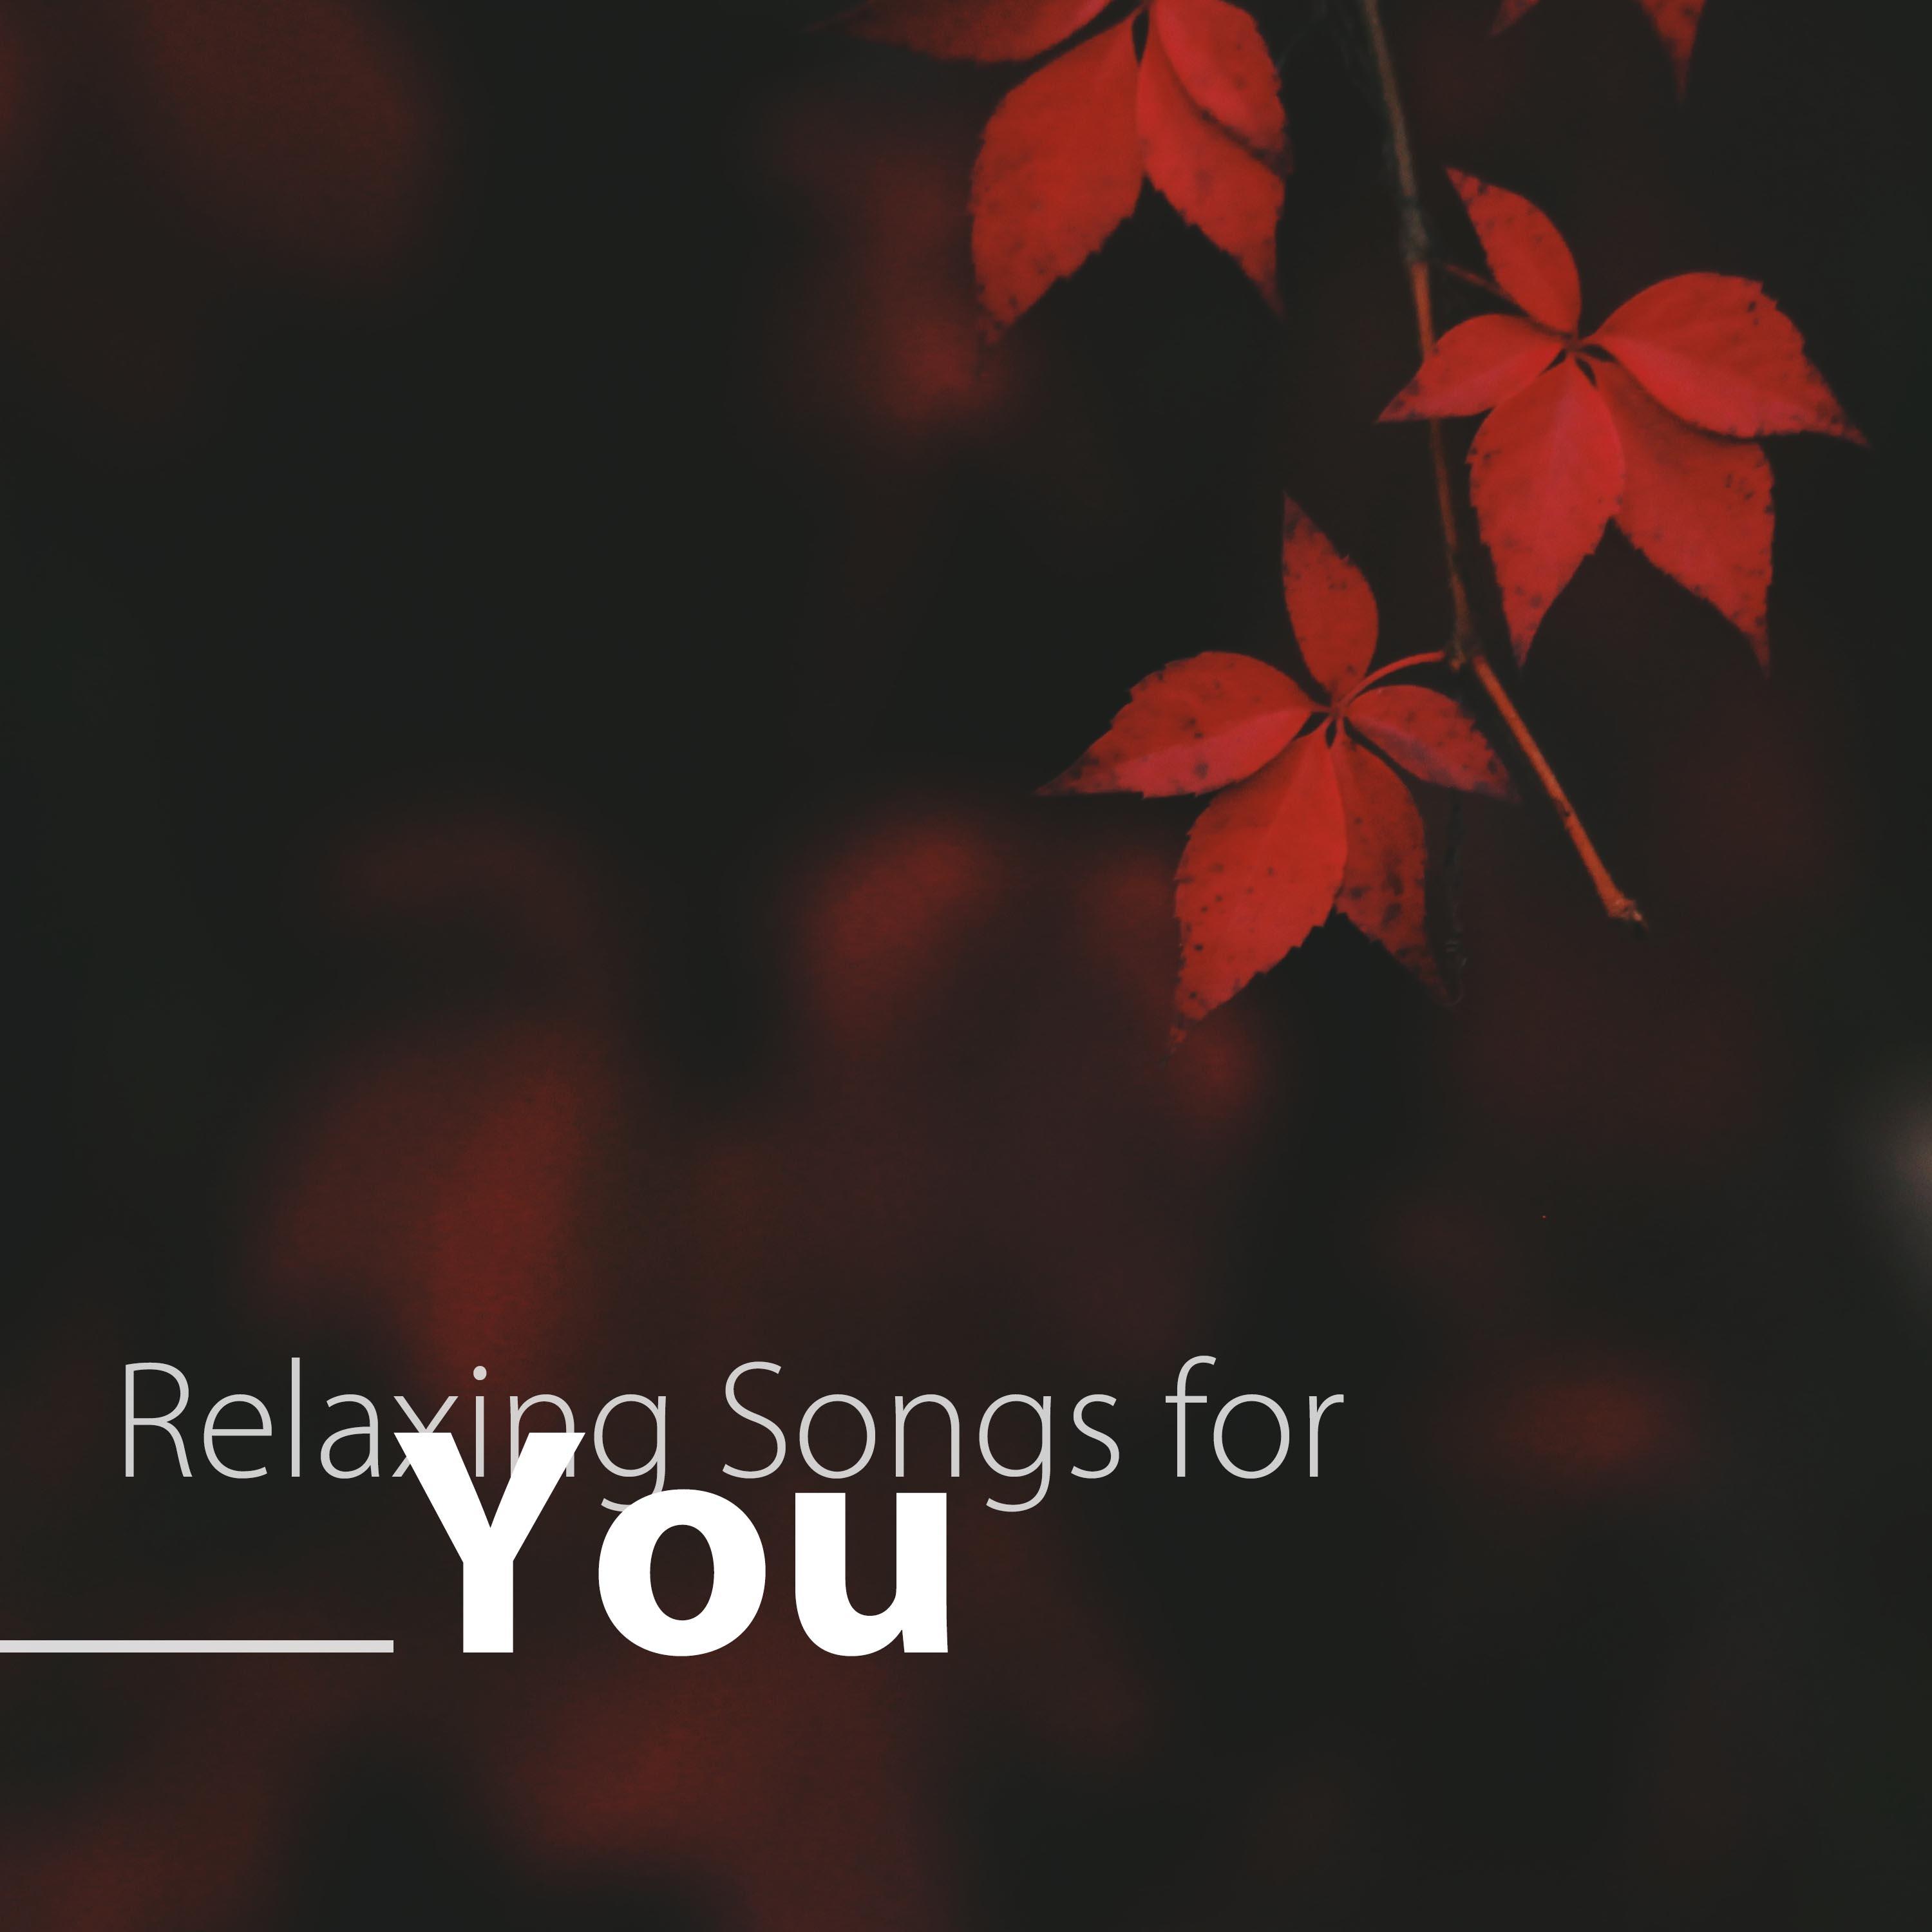 Relaxing Songs for You - Nature Sounds, Instrumental Zen Music for Inner Peace, Blessings, Serenity